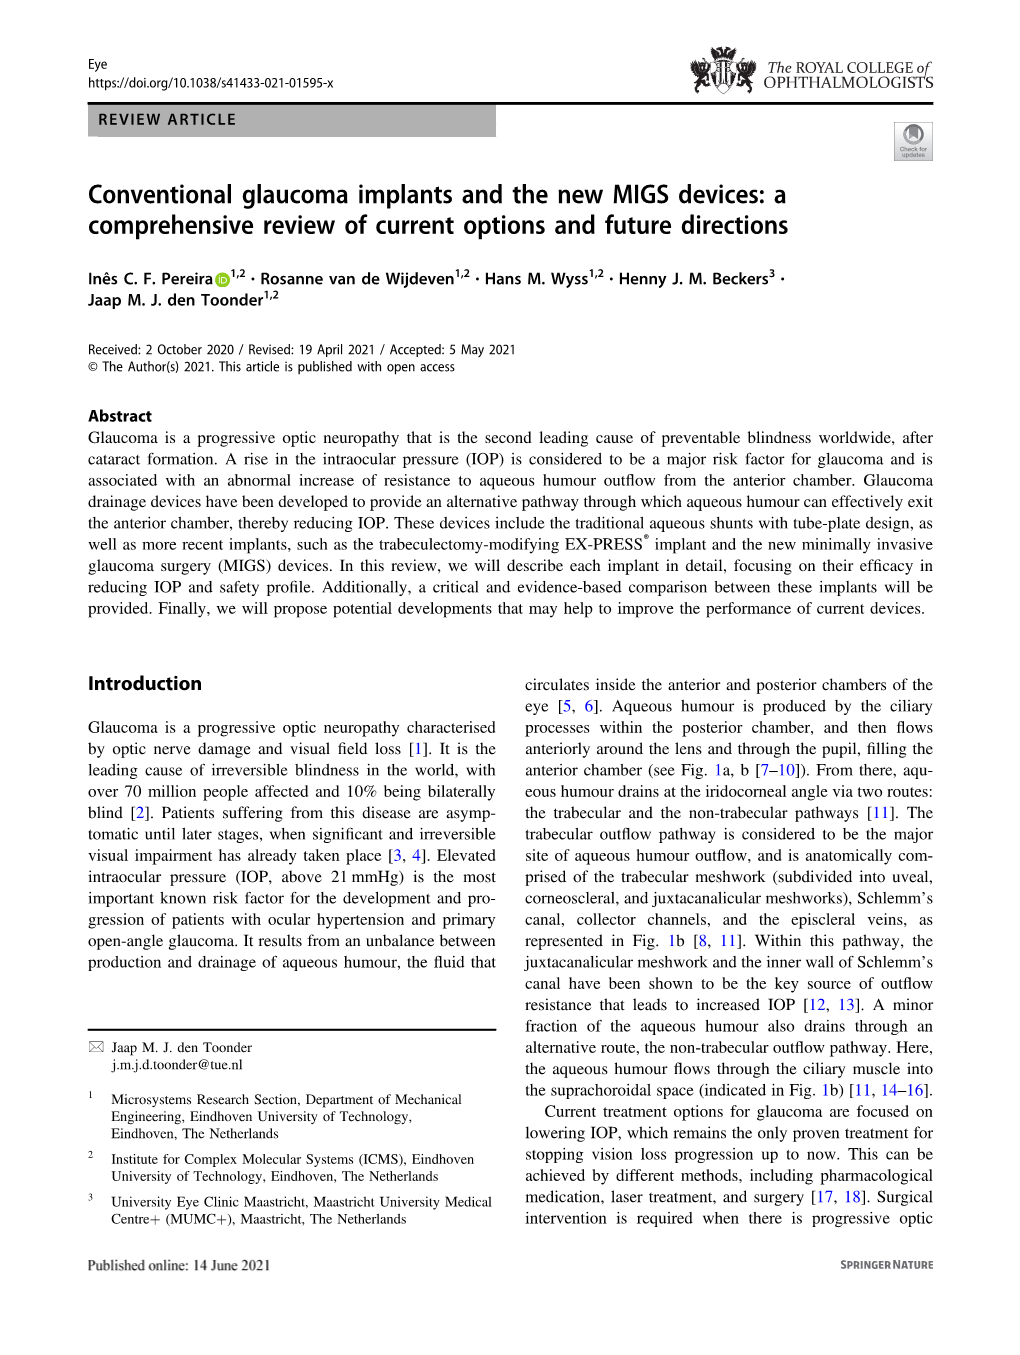 Conventional Glaucoma Implants and the New MIGS Devices: a Comprehensive Review of Current Options and Future Directions